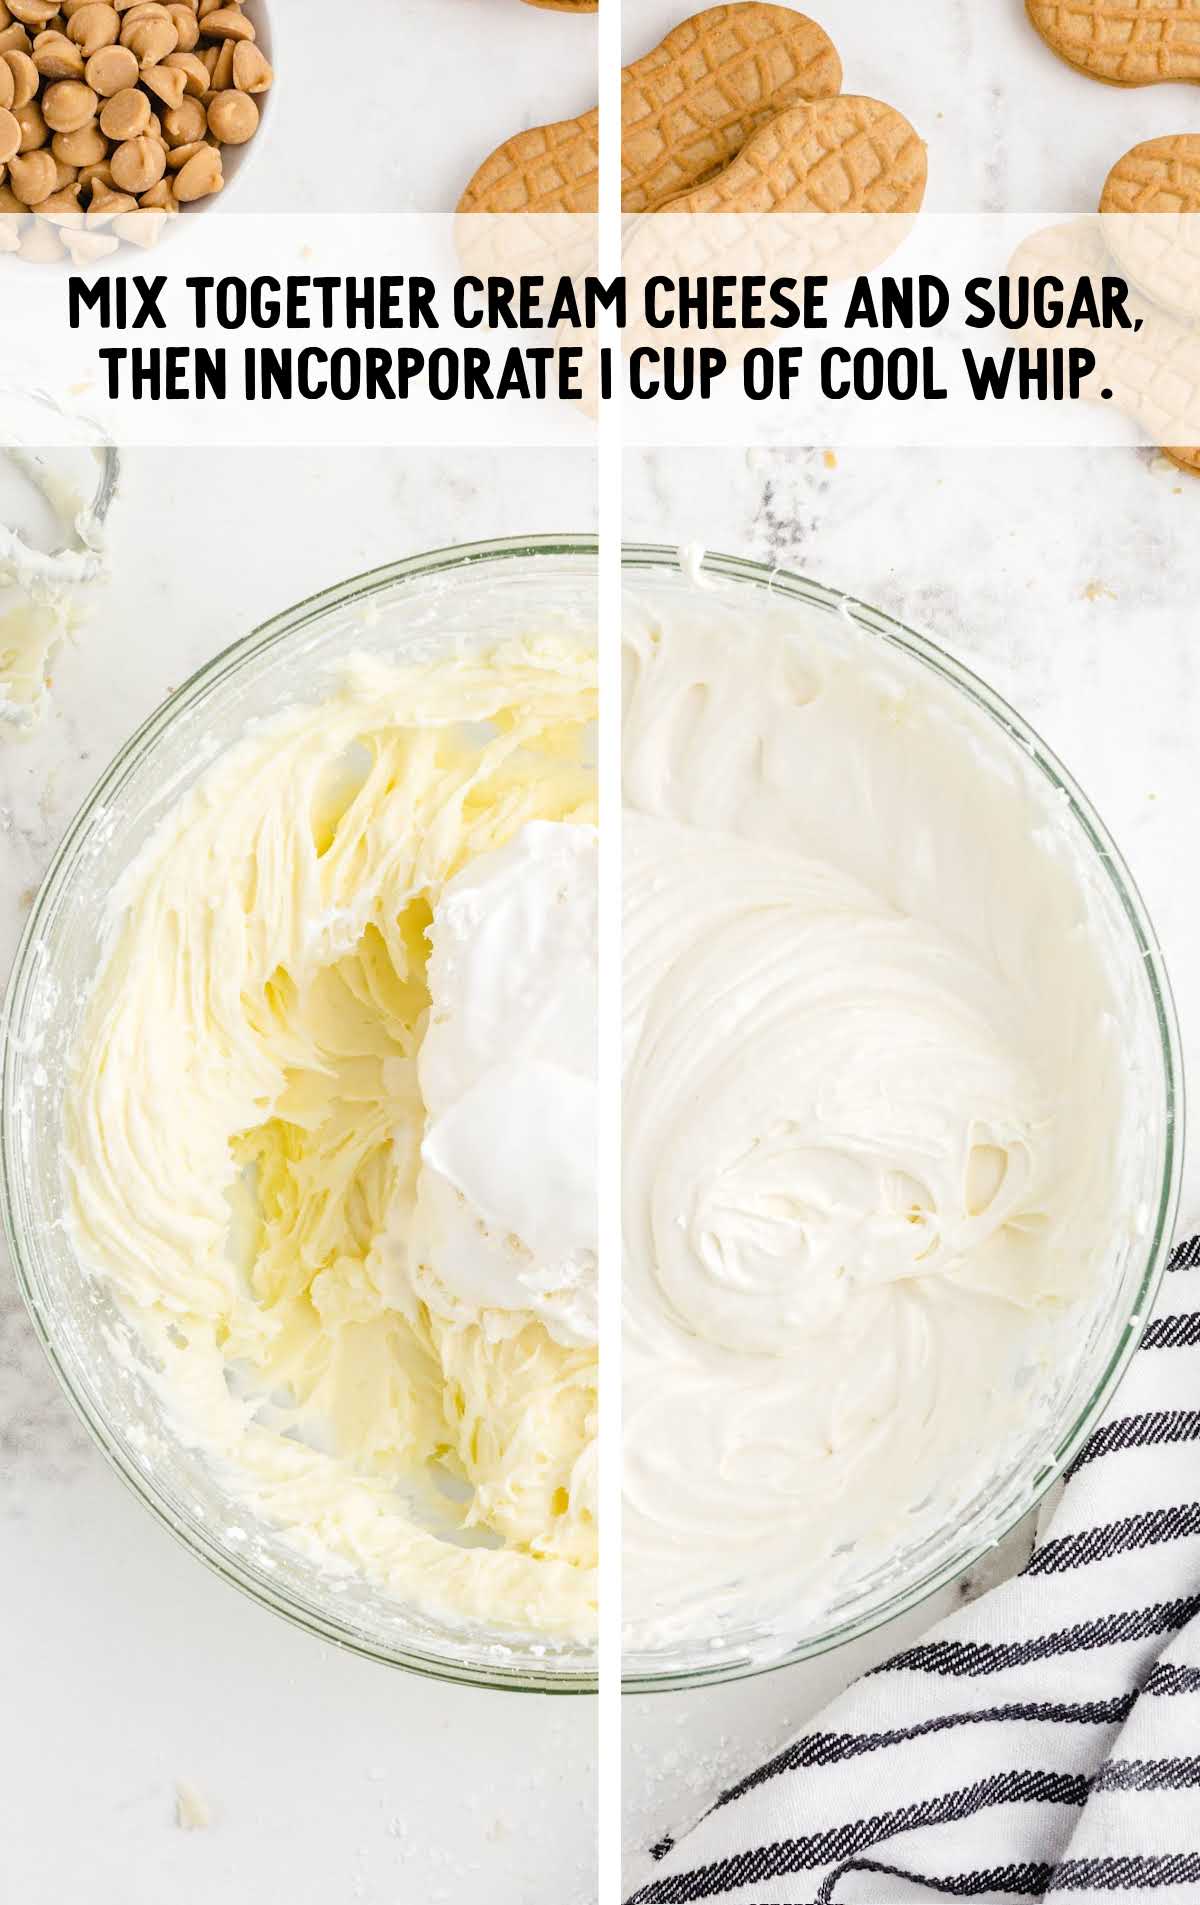 cream cheese, sugar, and cool whip being whisked together in a bowl